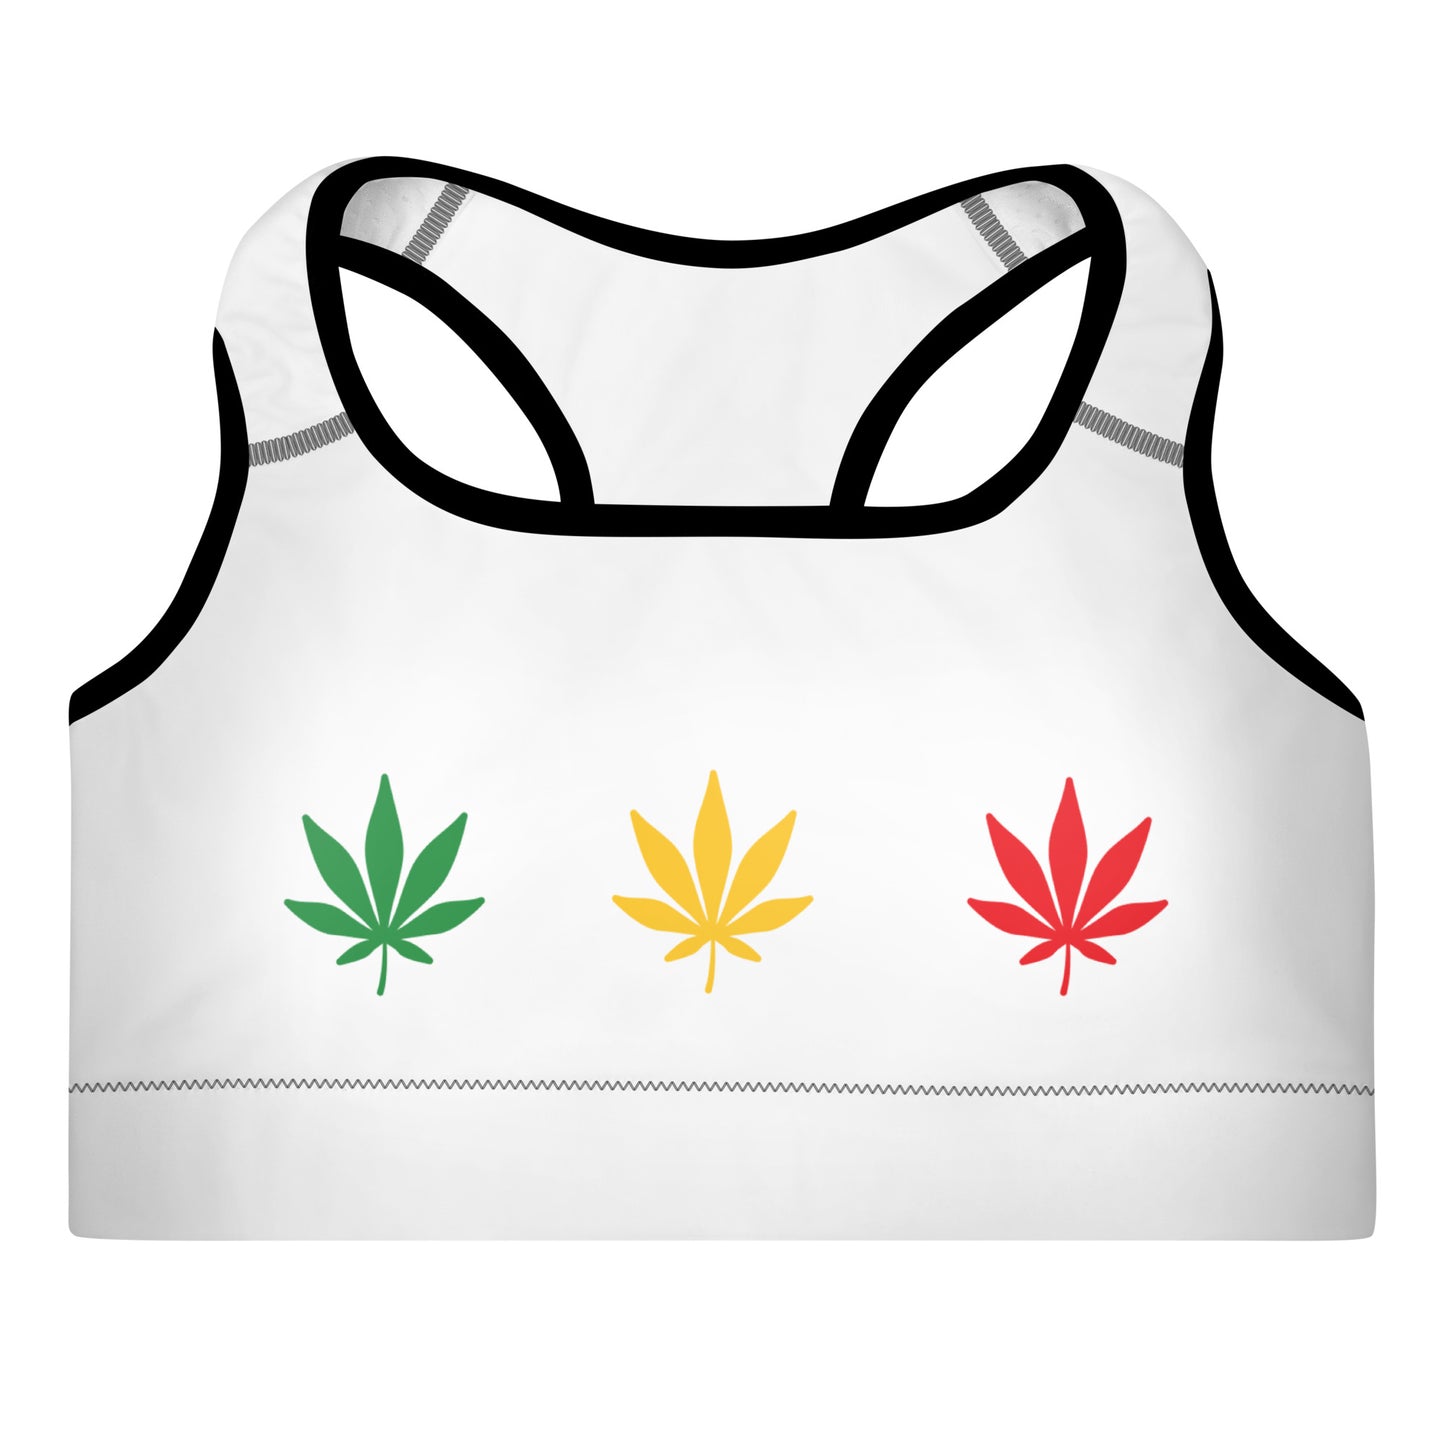 Green Yellow Red Leaf Padded Sports Bra